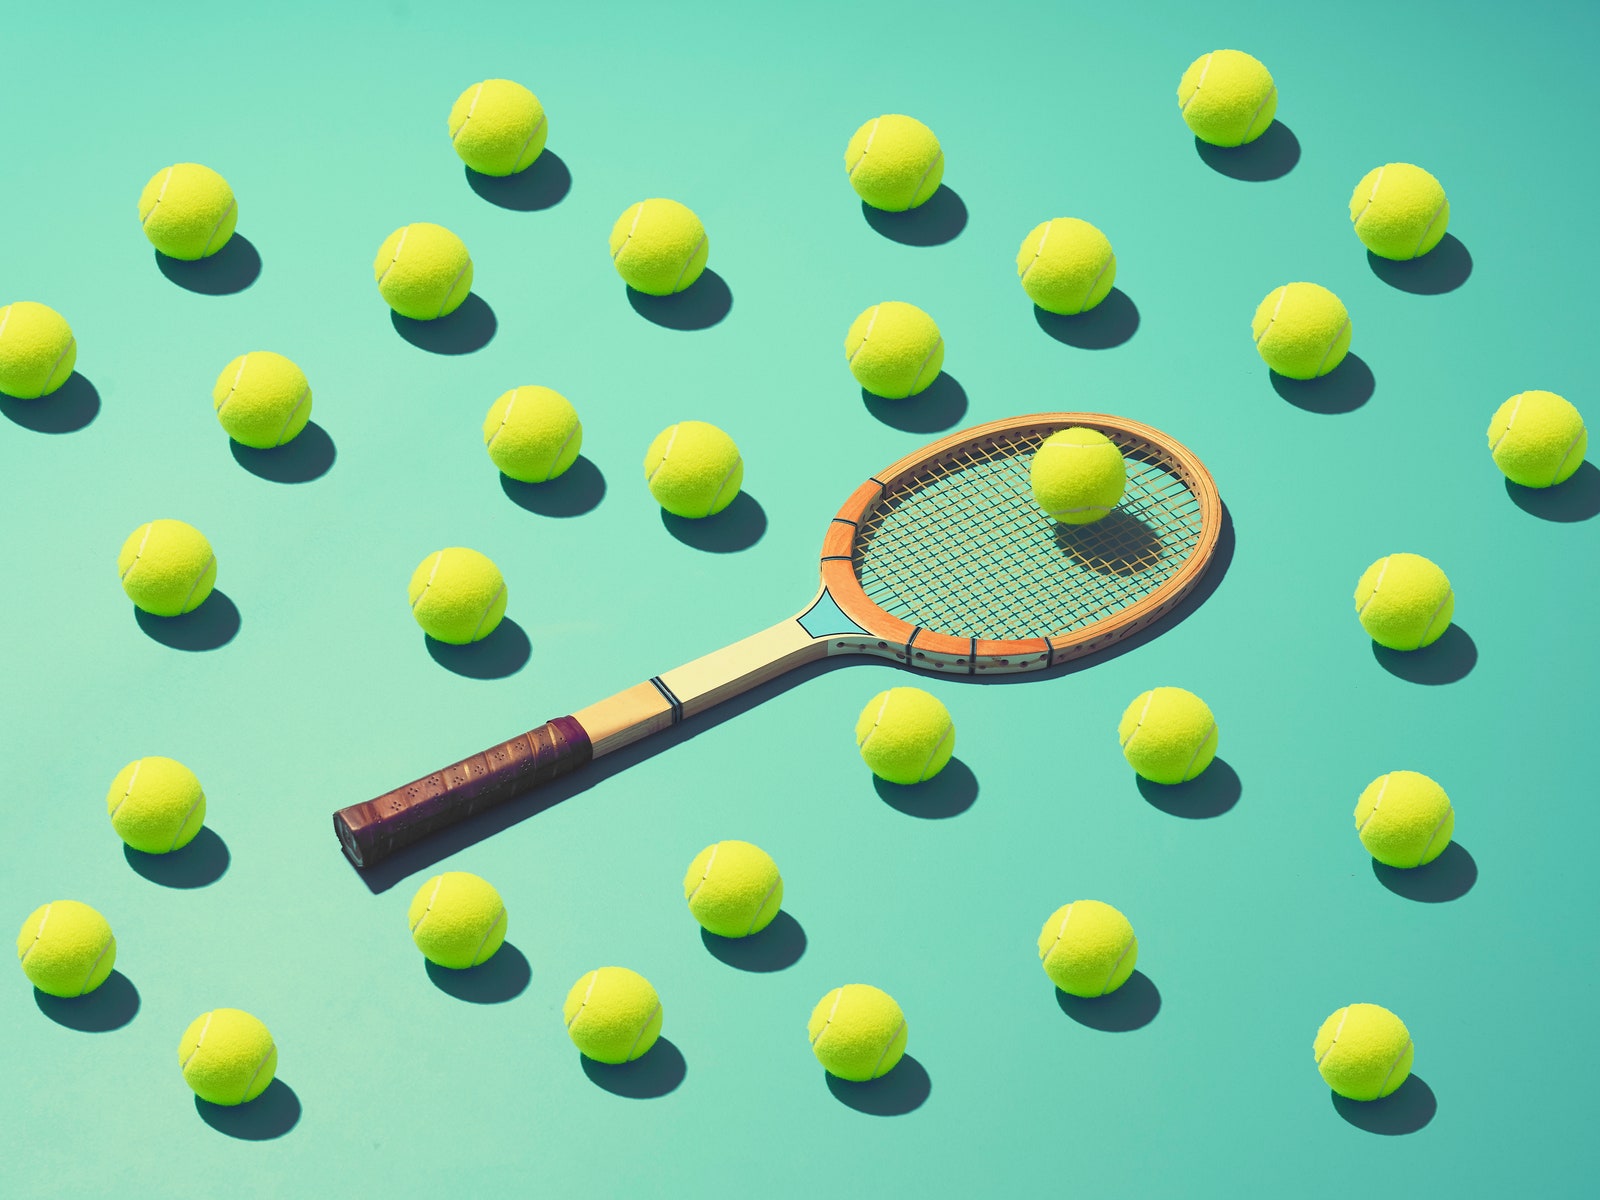 A tennis racket surrounded with a large number of tennis balls